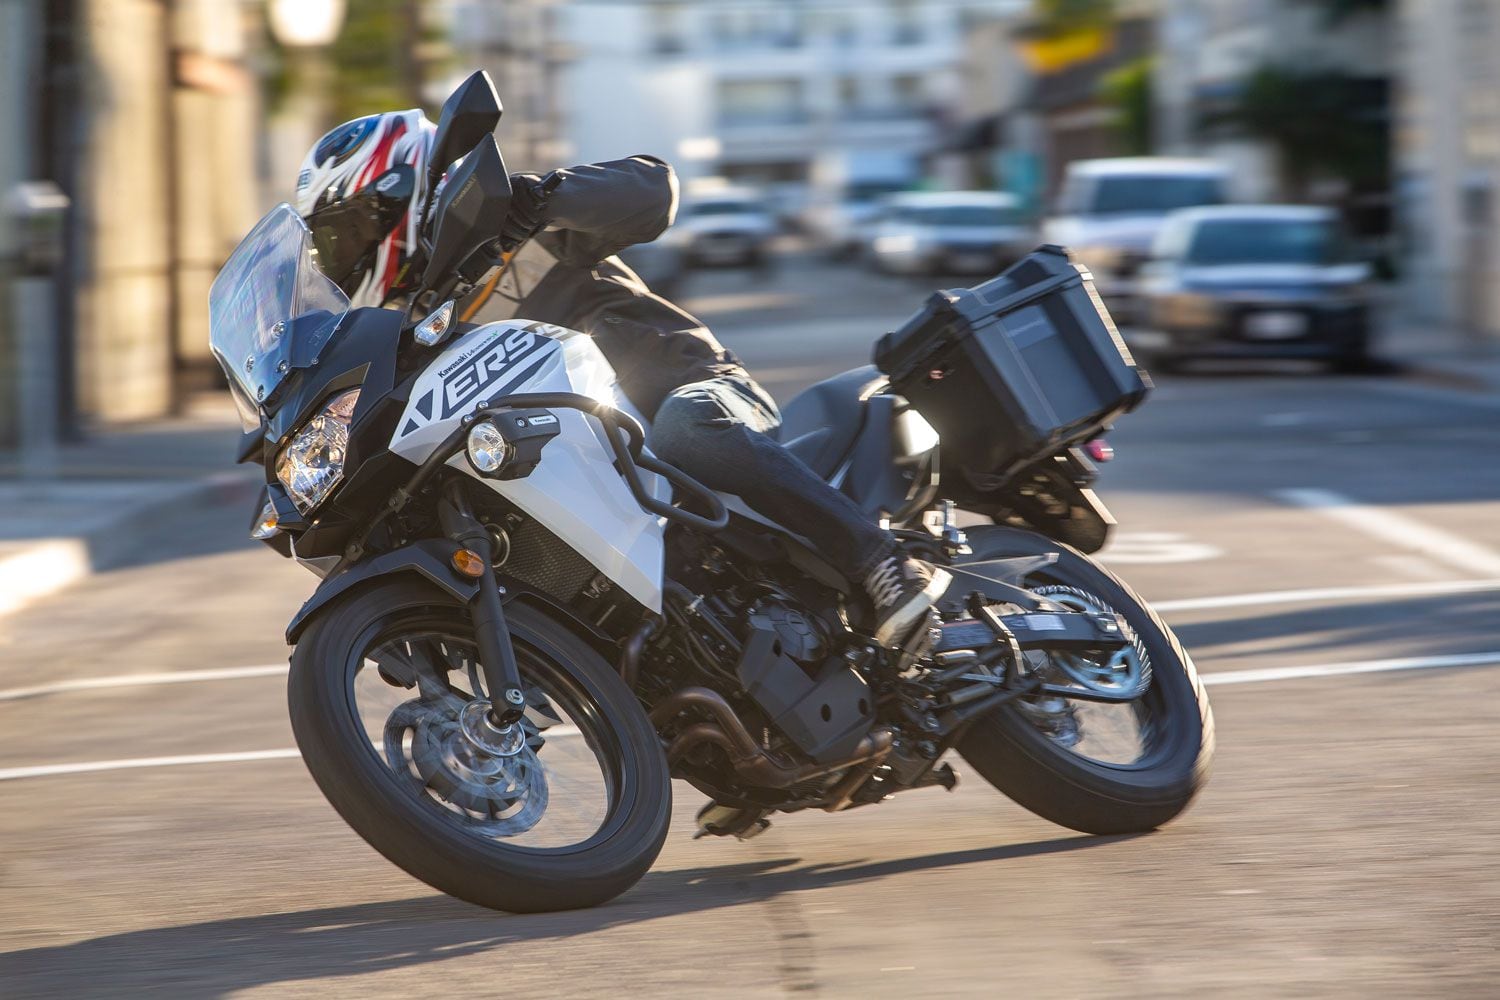 The Versys-X has enough cornering clearance for tight twists and turns at a good pace.